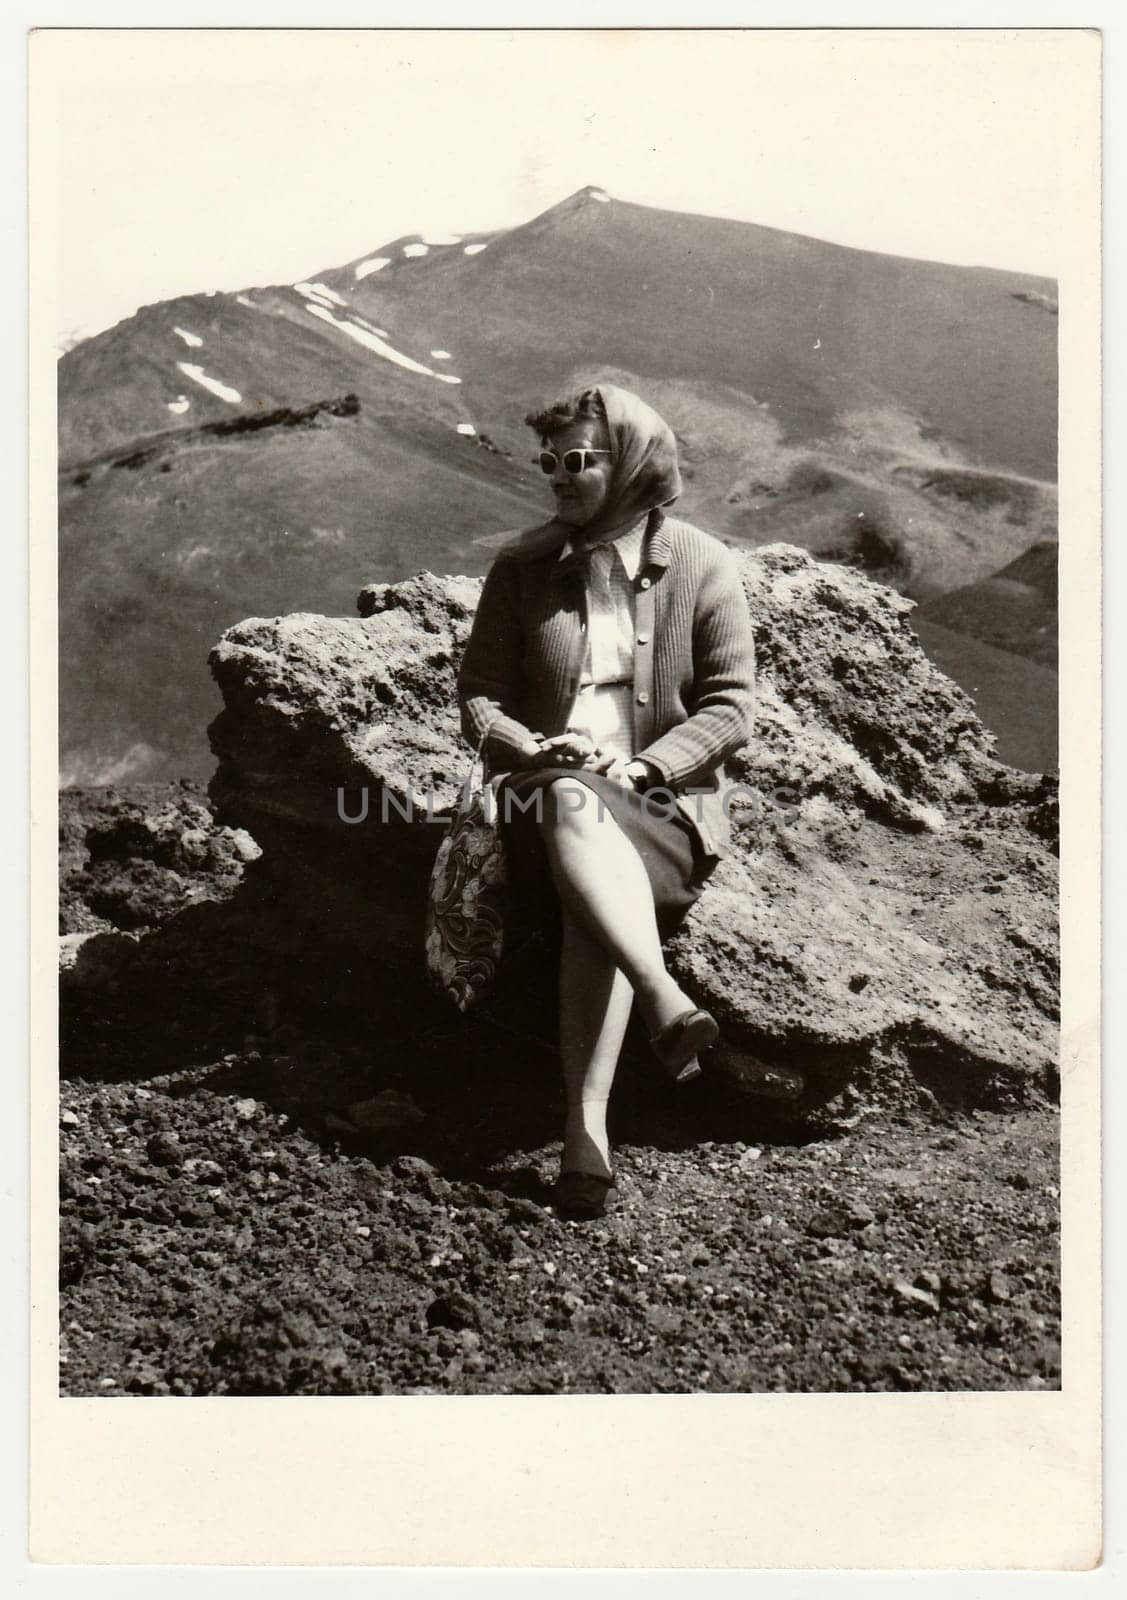 ITALY - CIRCA 1960s: Vintage photo shows woman on vacation.